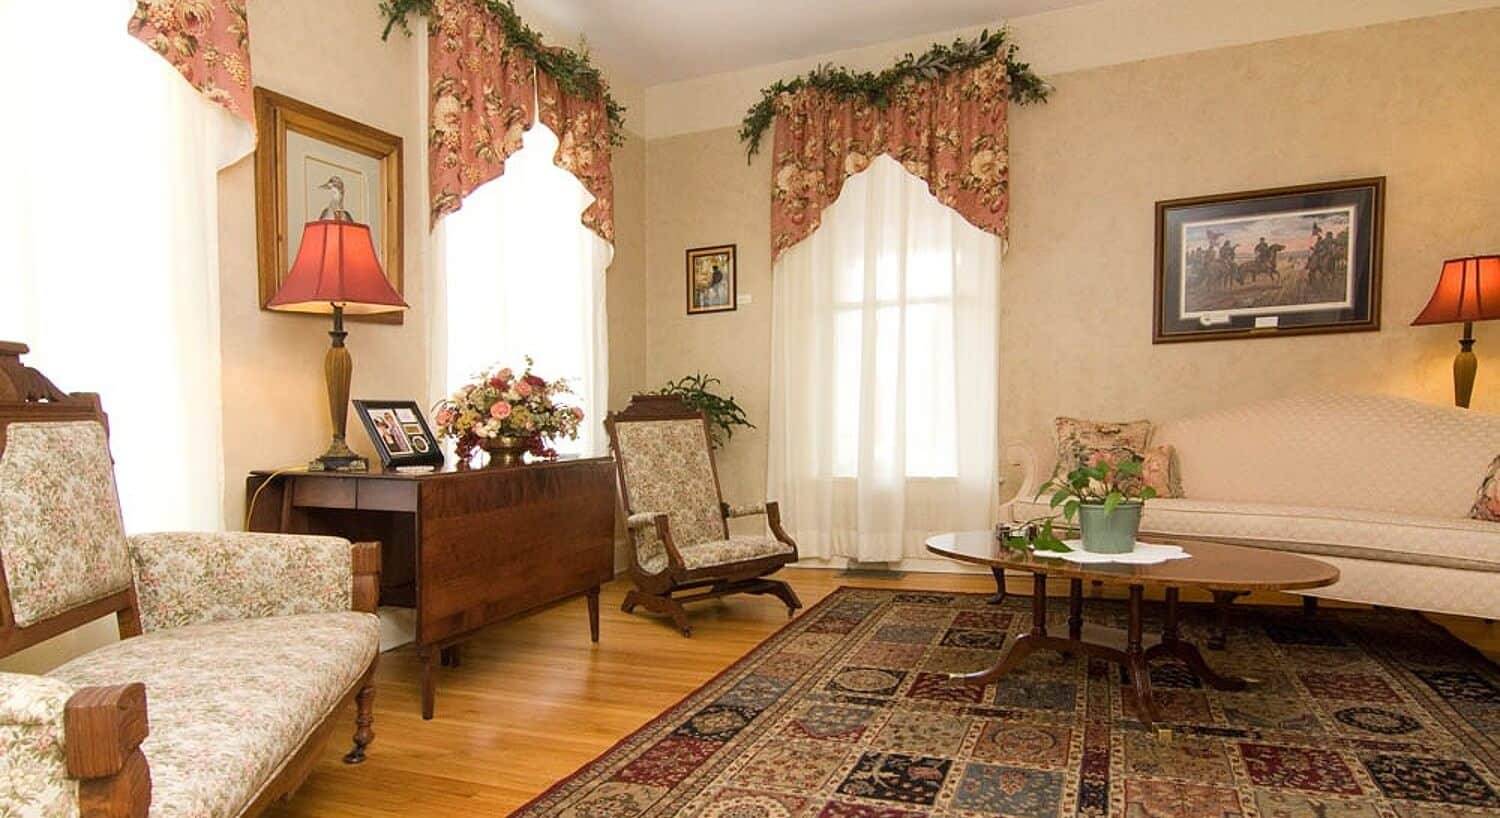 Living room of a home with a cream colored couch, two chairs, coffee table and three windows with floral curtains